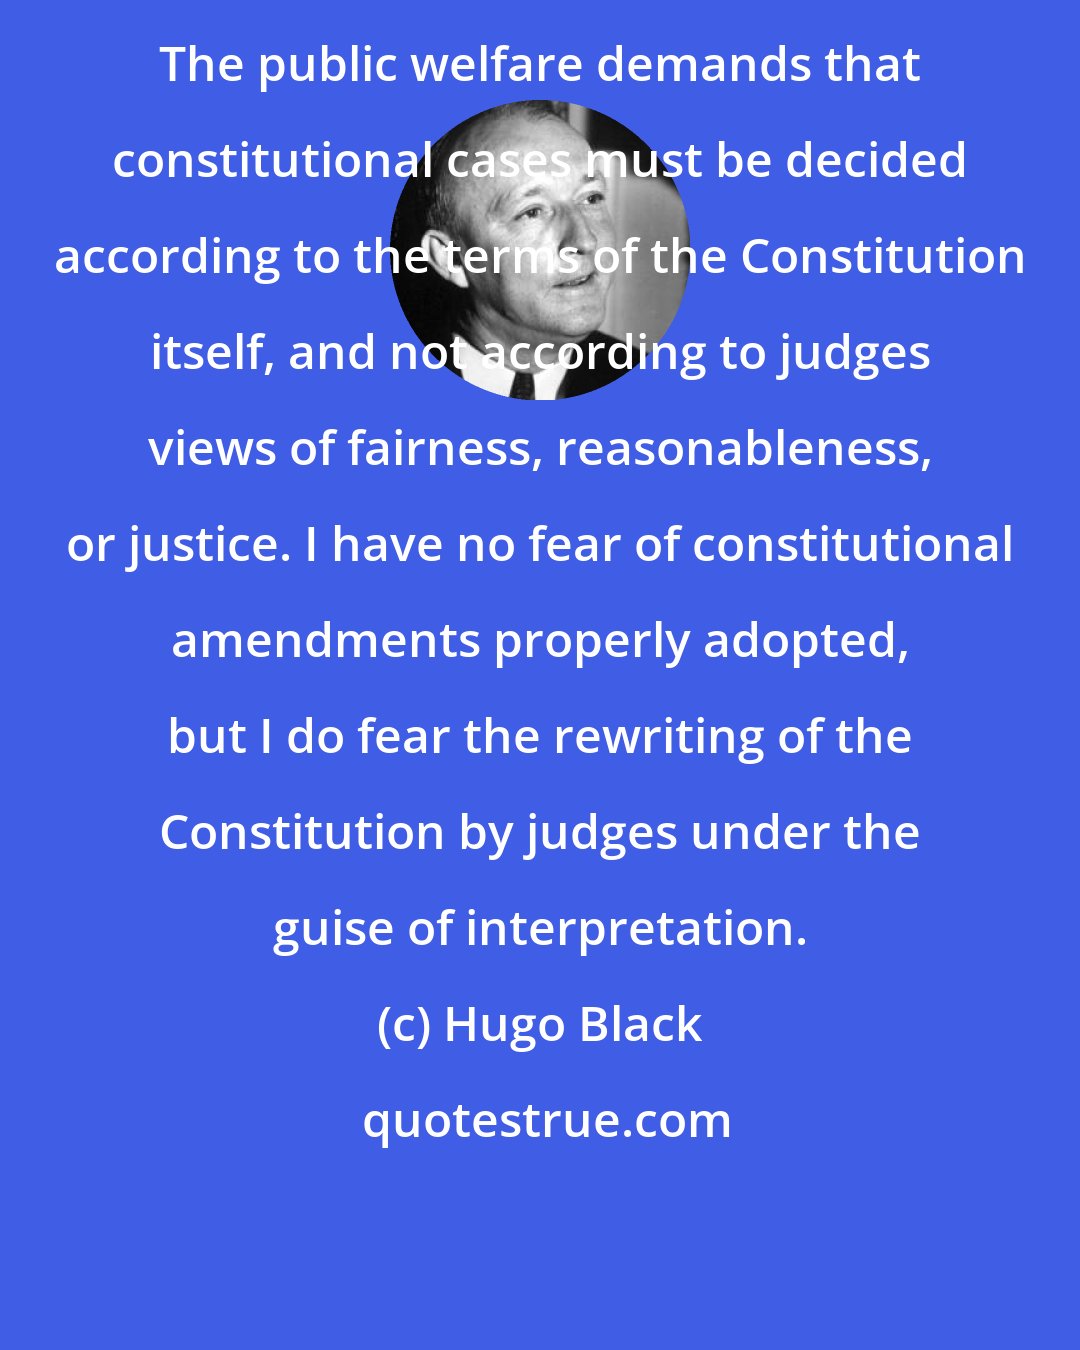 Hugo Black: The public welfare demands that constitutional cases must be decided according to the terms of the Constitution itself, and not according to judges views of fairness, reasonableness, or justice. I have no fear of constitutional amendments properly adopted, but I do fear the rewriting of the Constitution by judges under the guise of interpretation.